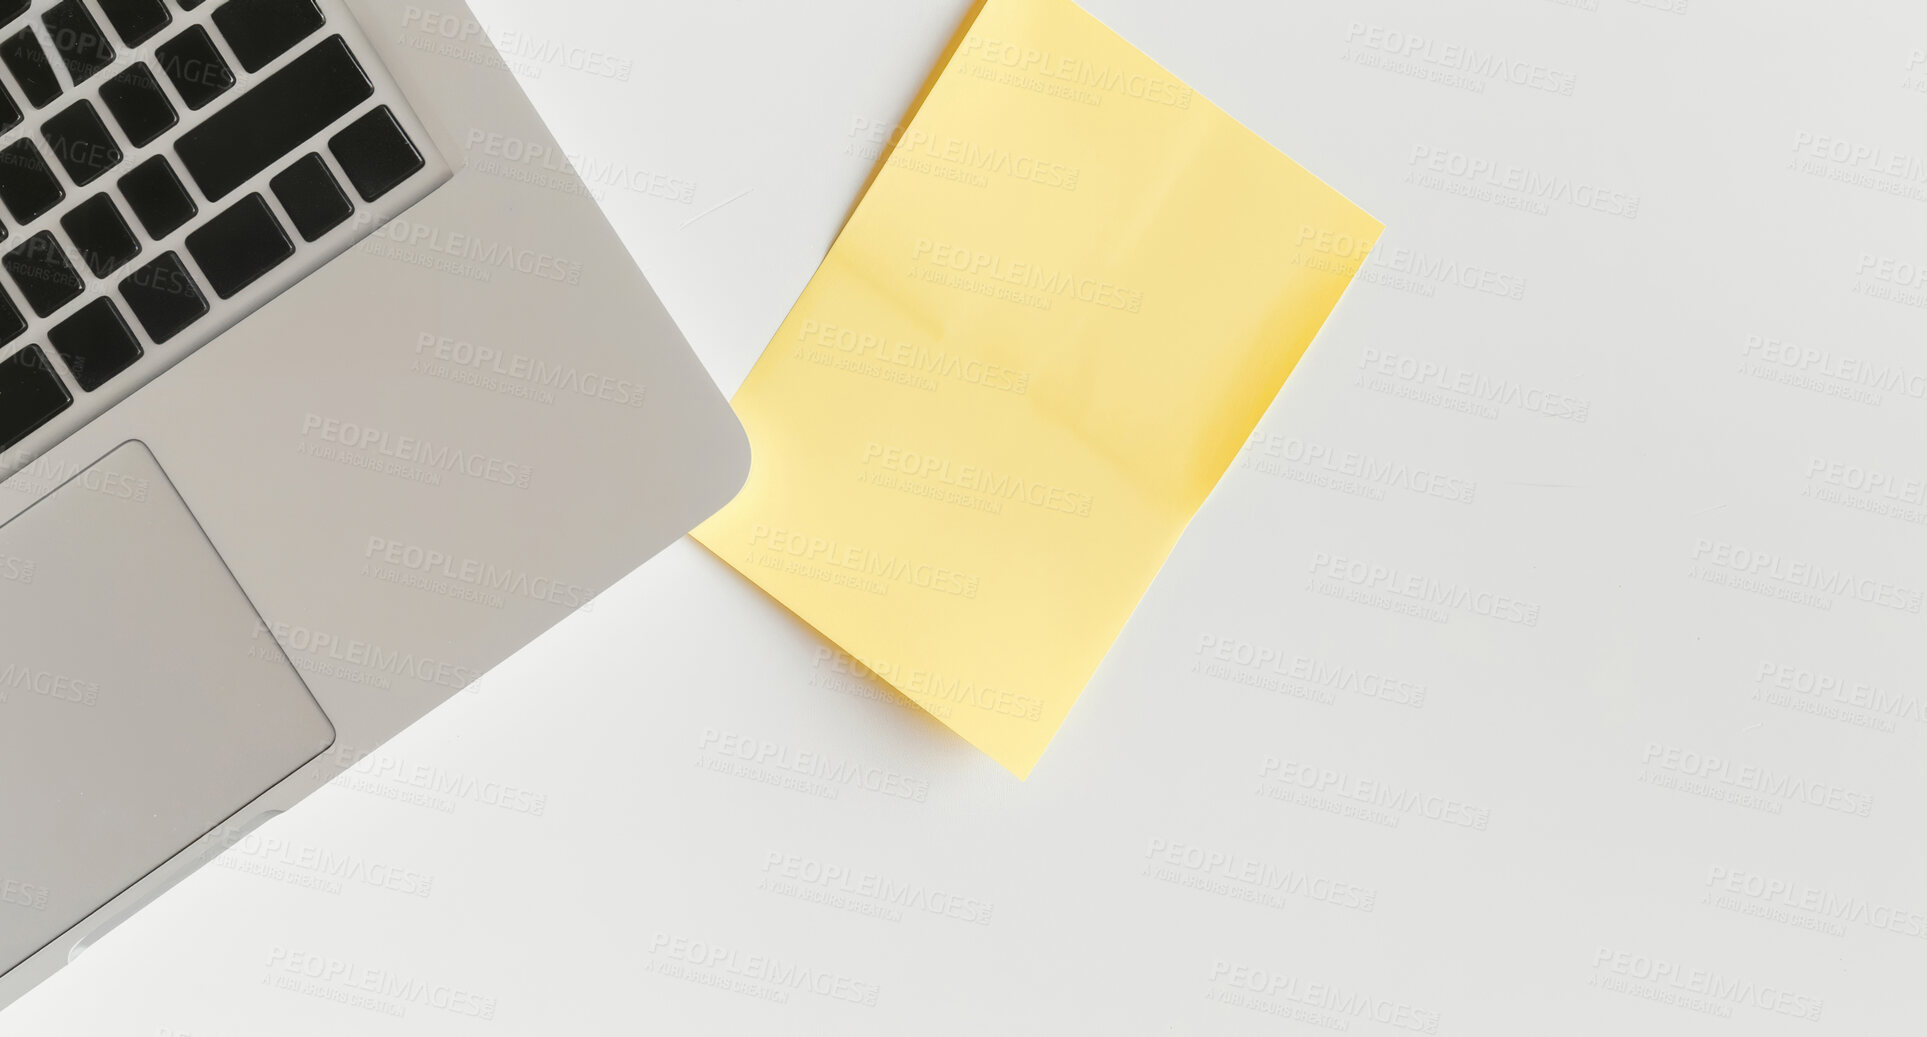 Buy stock photo Laptop, sticky note and label with schedule above in planning, agenda or tasks at office. Top view of empty space with small document, tab or sign for checklist, tips or reminder on memo at workplace